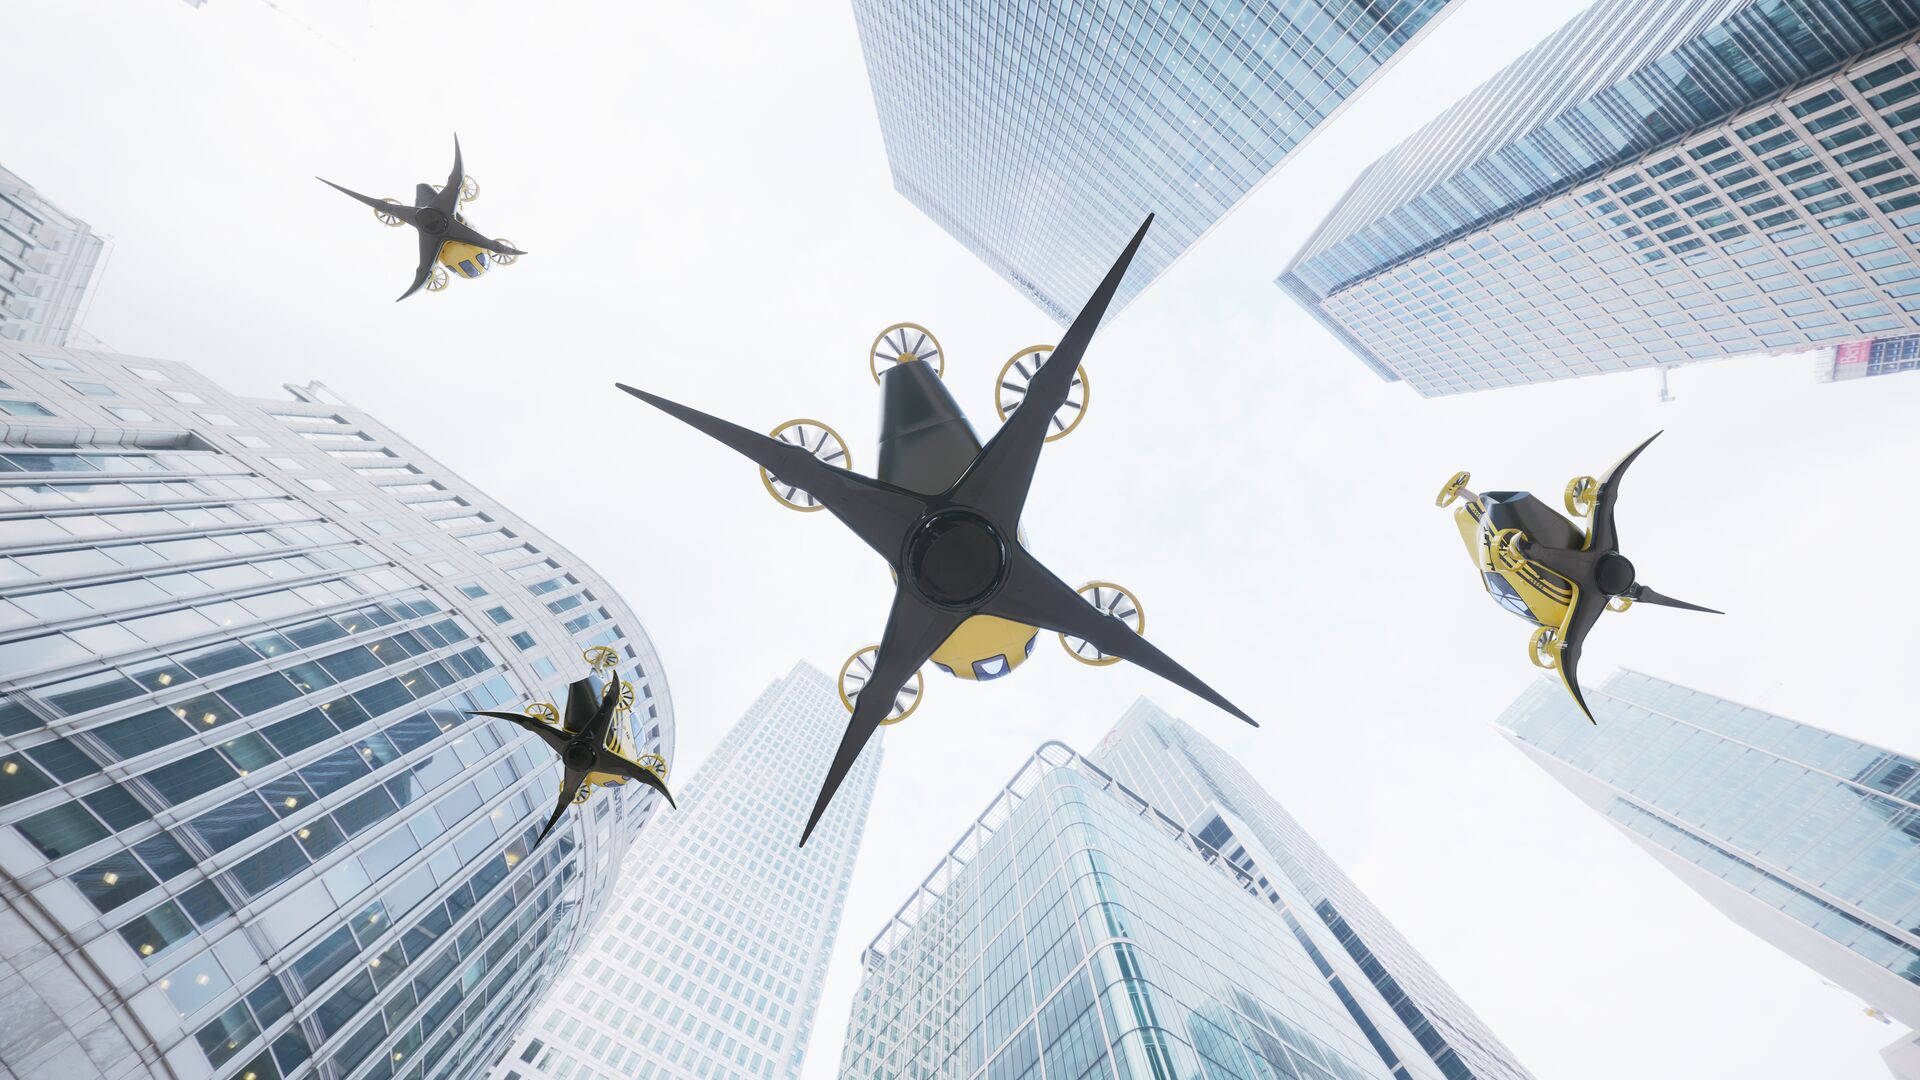 EVTOl helicopters ascending in a city surrounded by tall buildings. An image meant to show the growth of EVTOL.